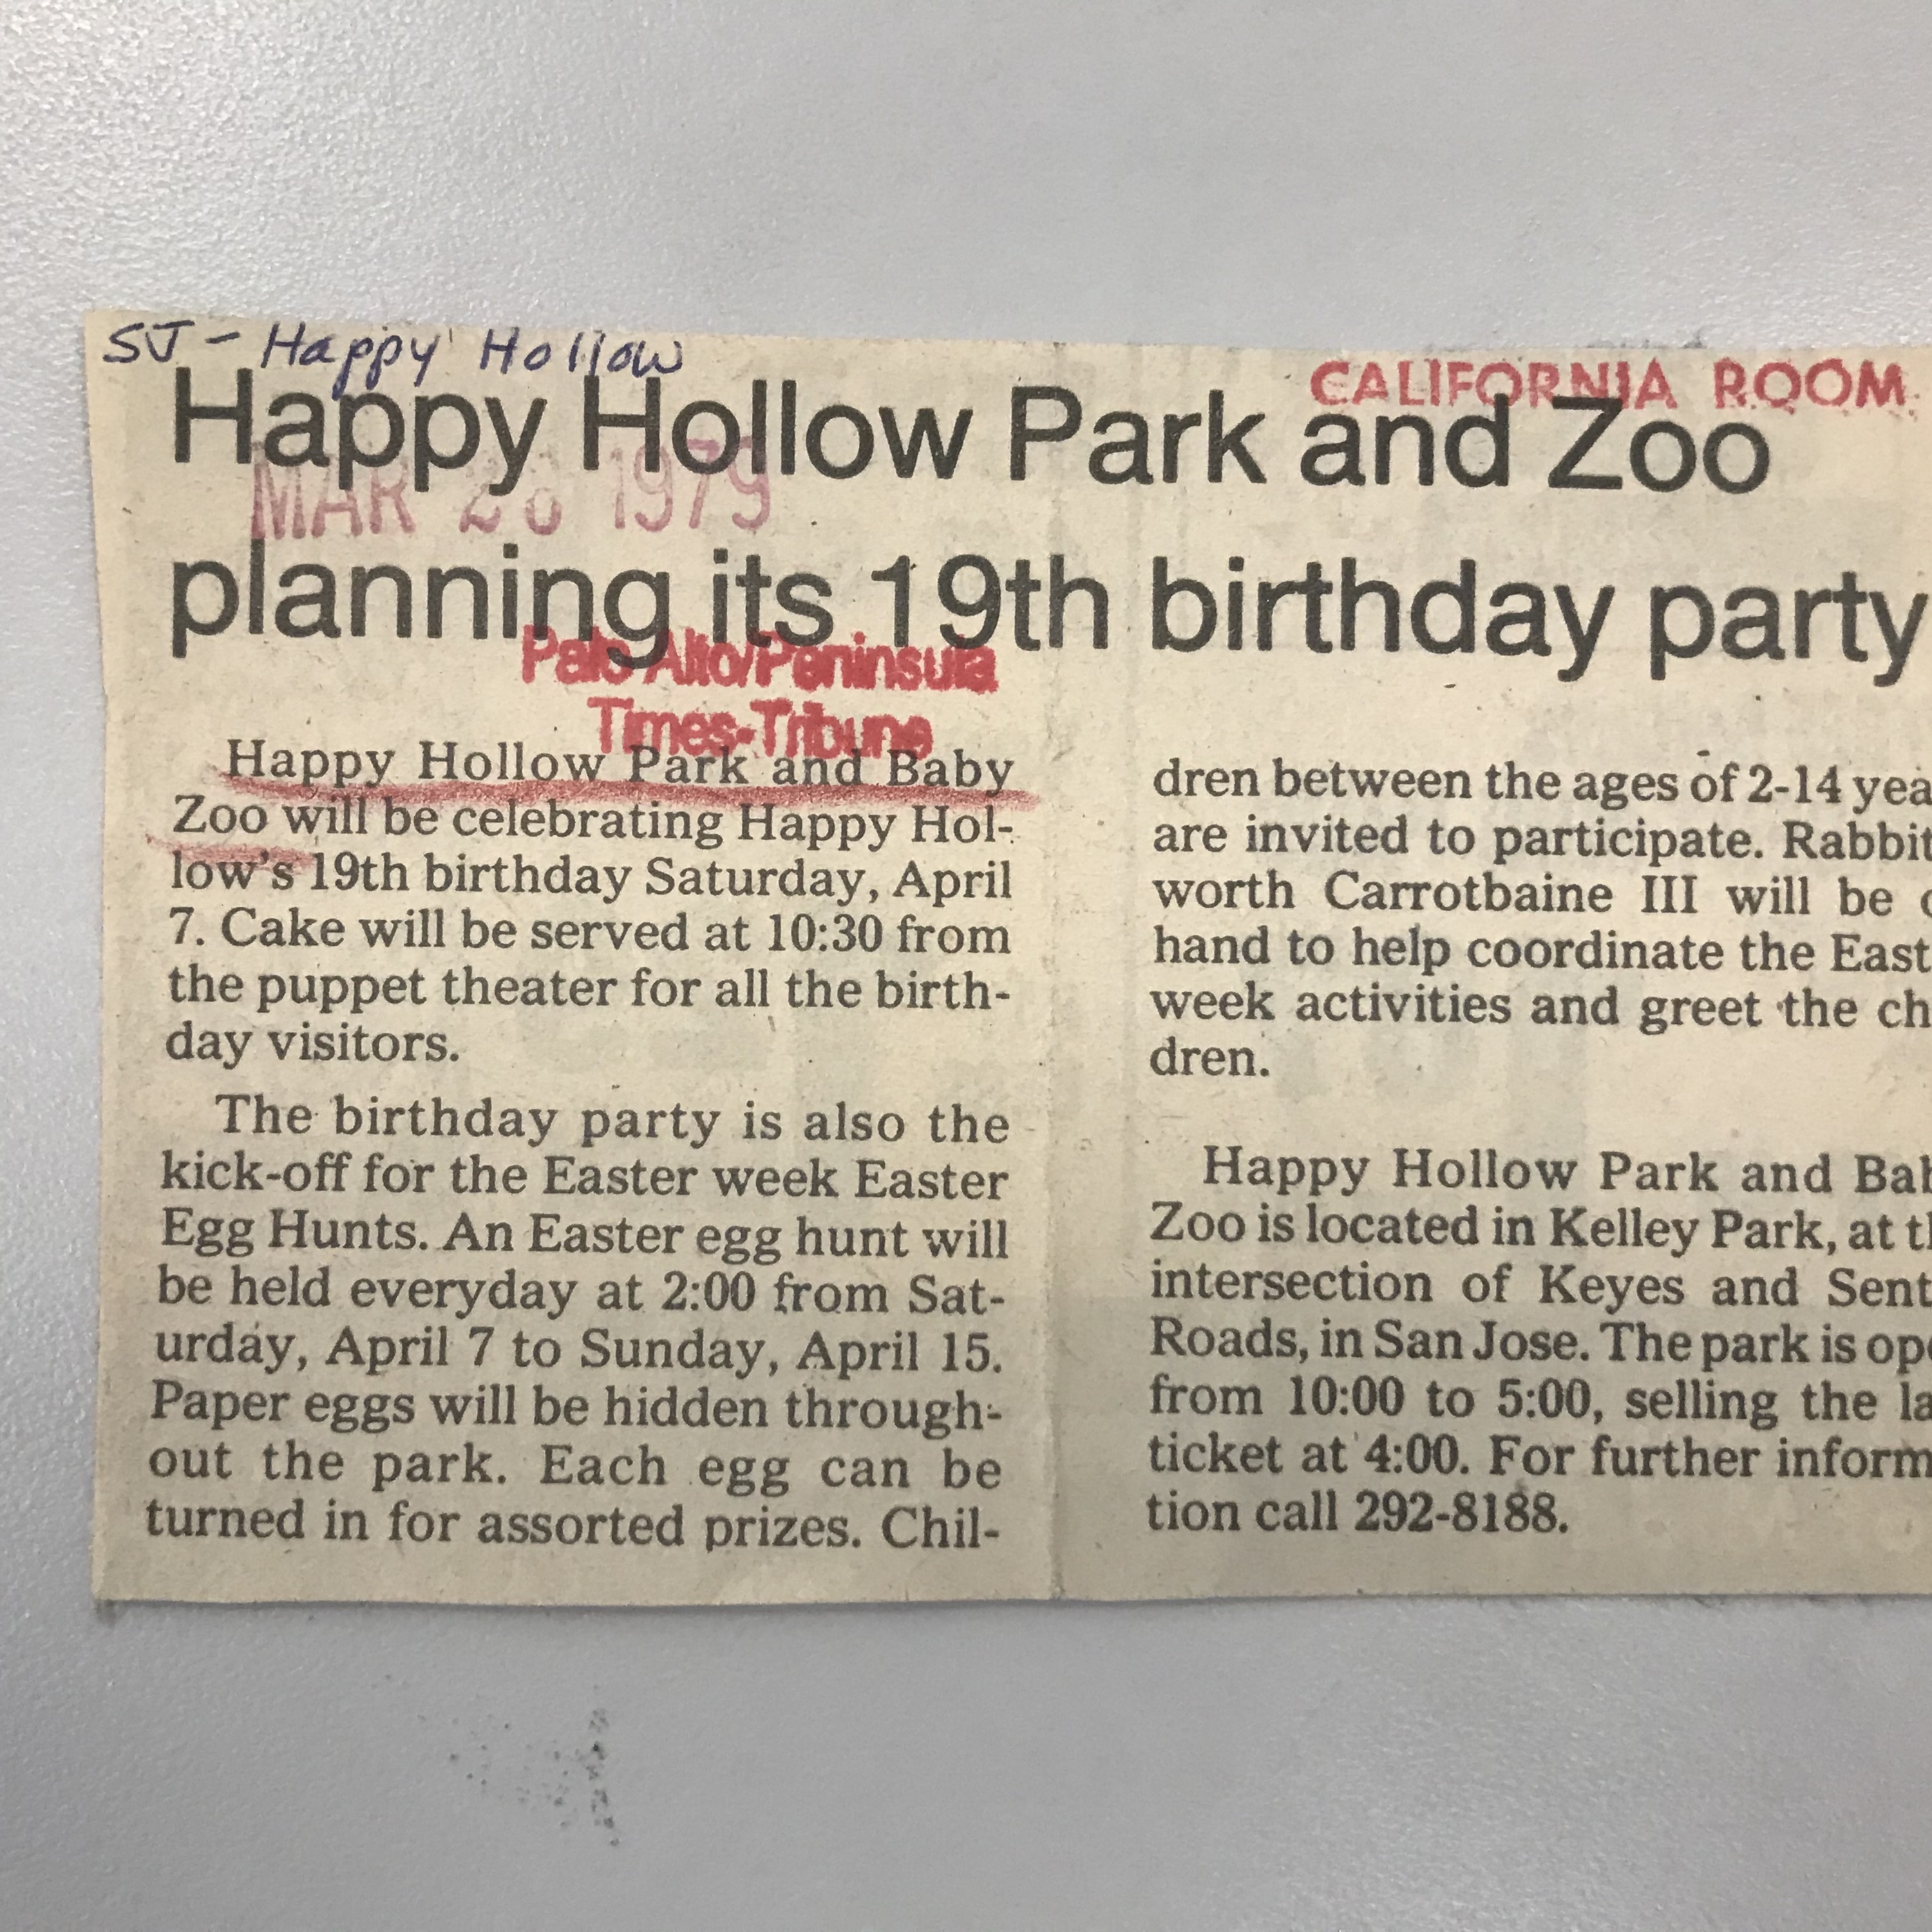 &quot;Happy Hollow Park and Zoo planning its 19th birthday party&quot; Article